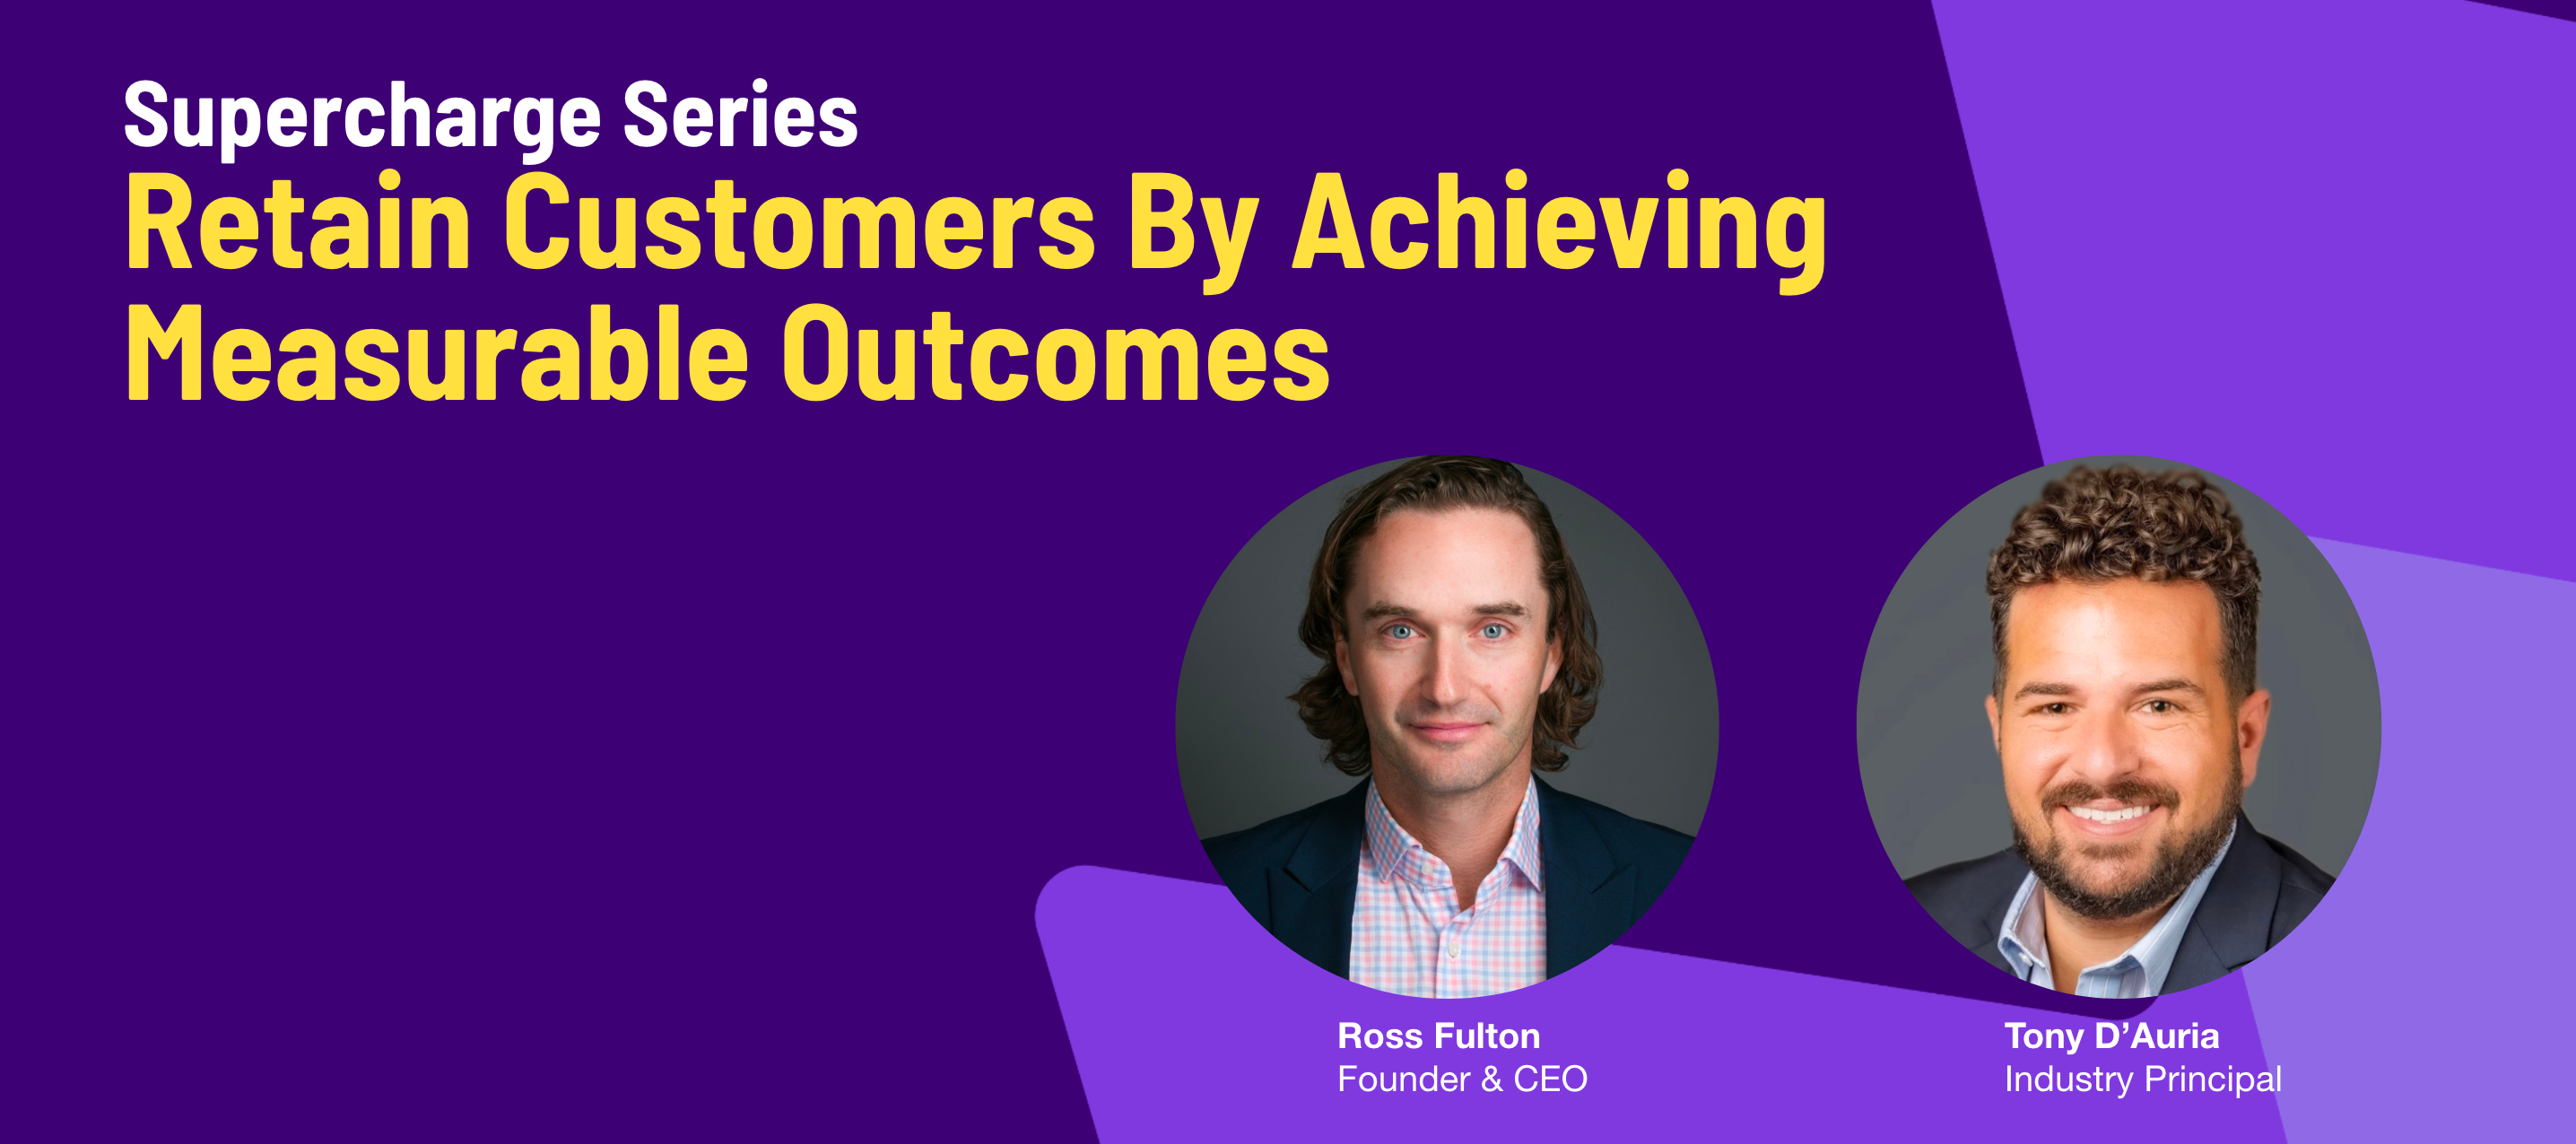 VisioneersTV Supercharge Series: Retain Customer by Achieving Measurable Outcomes